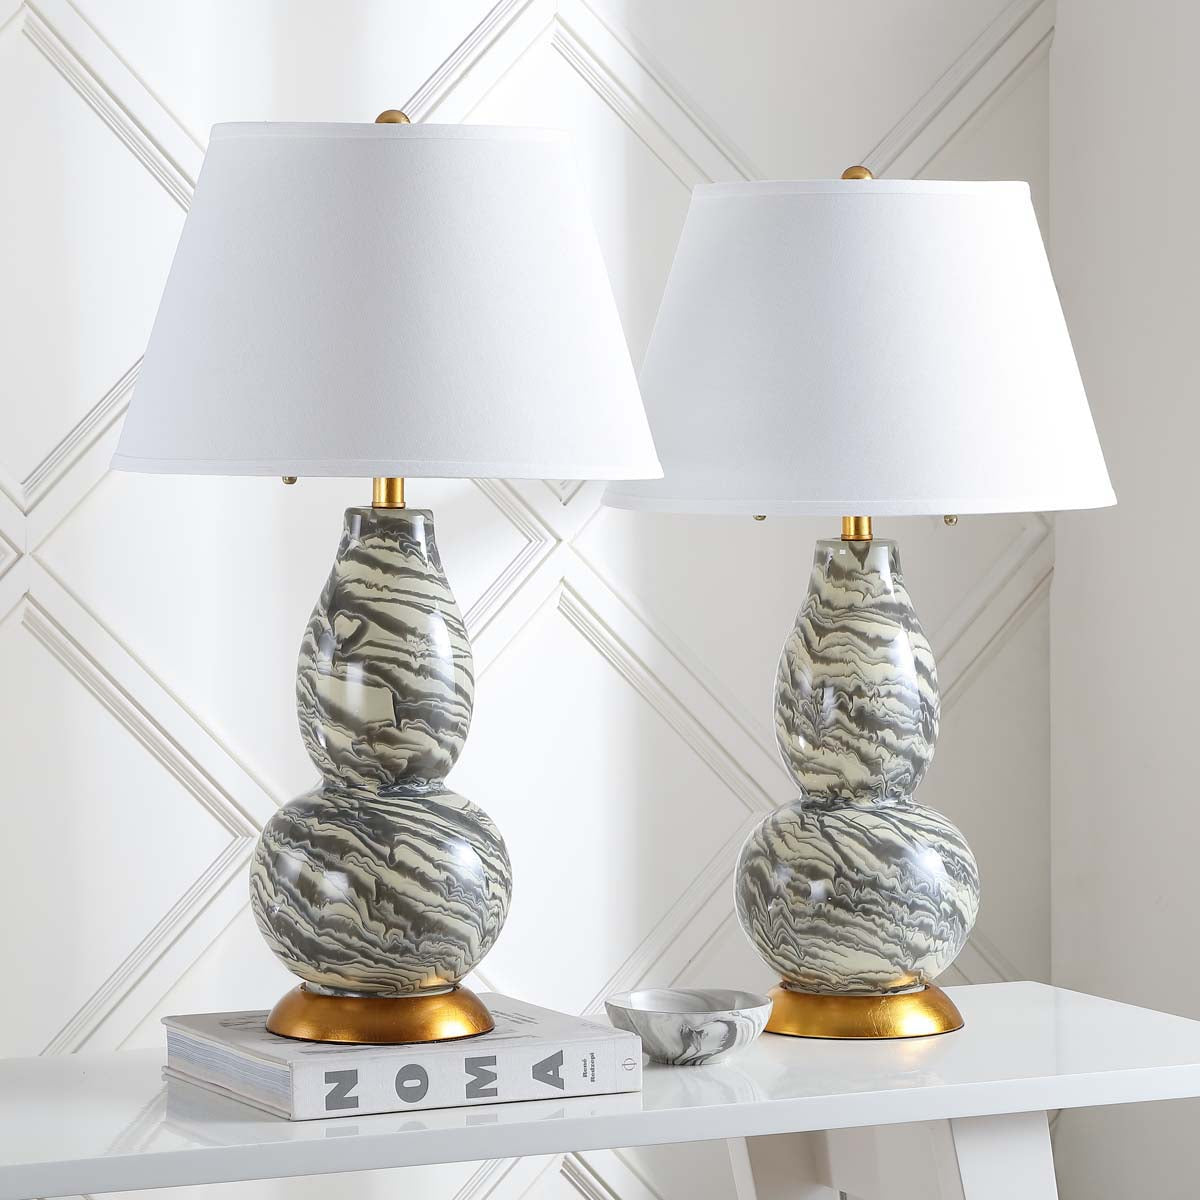 Safavieh Color Swirls 28 Inch H Glass Table Lamp, LIT4159 - Gery/White (Set of 2)